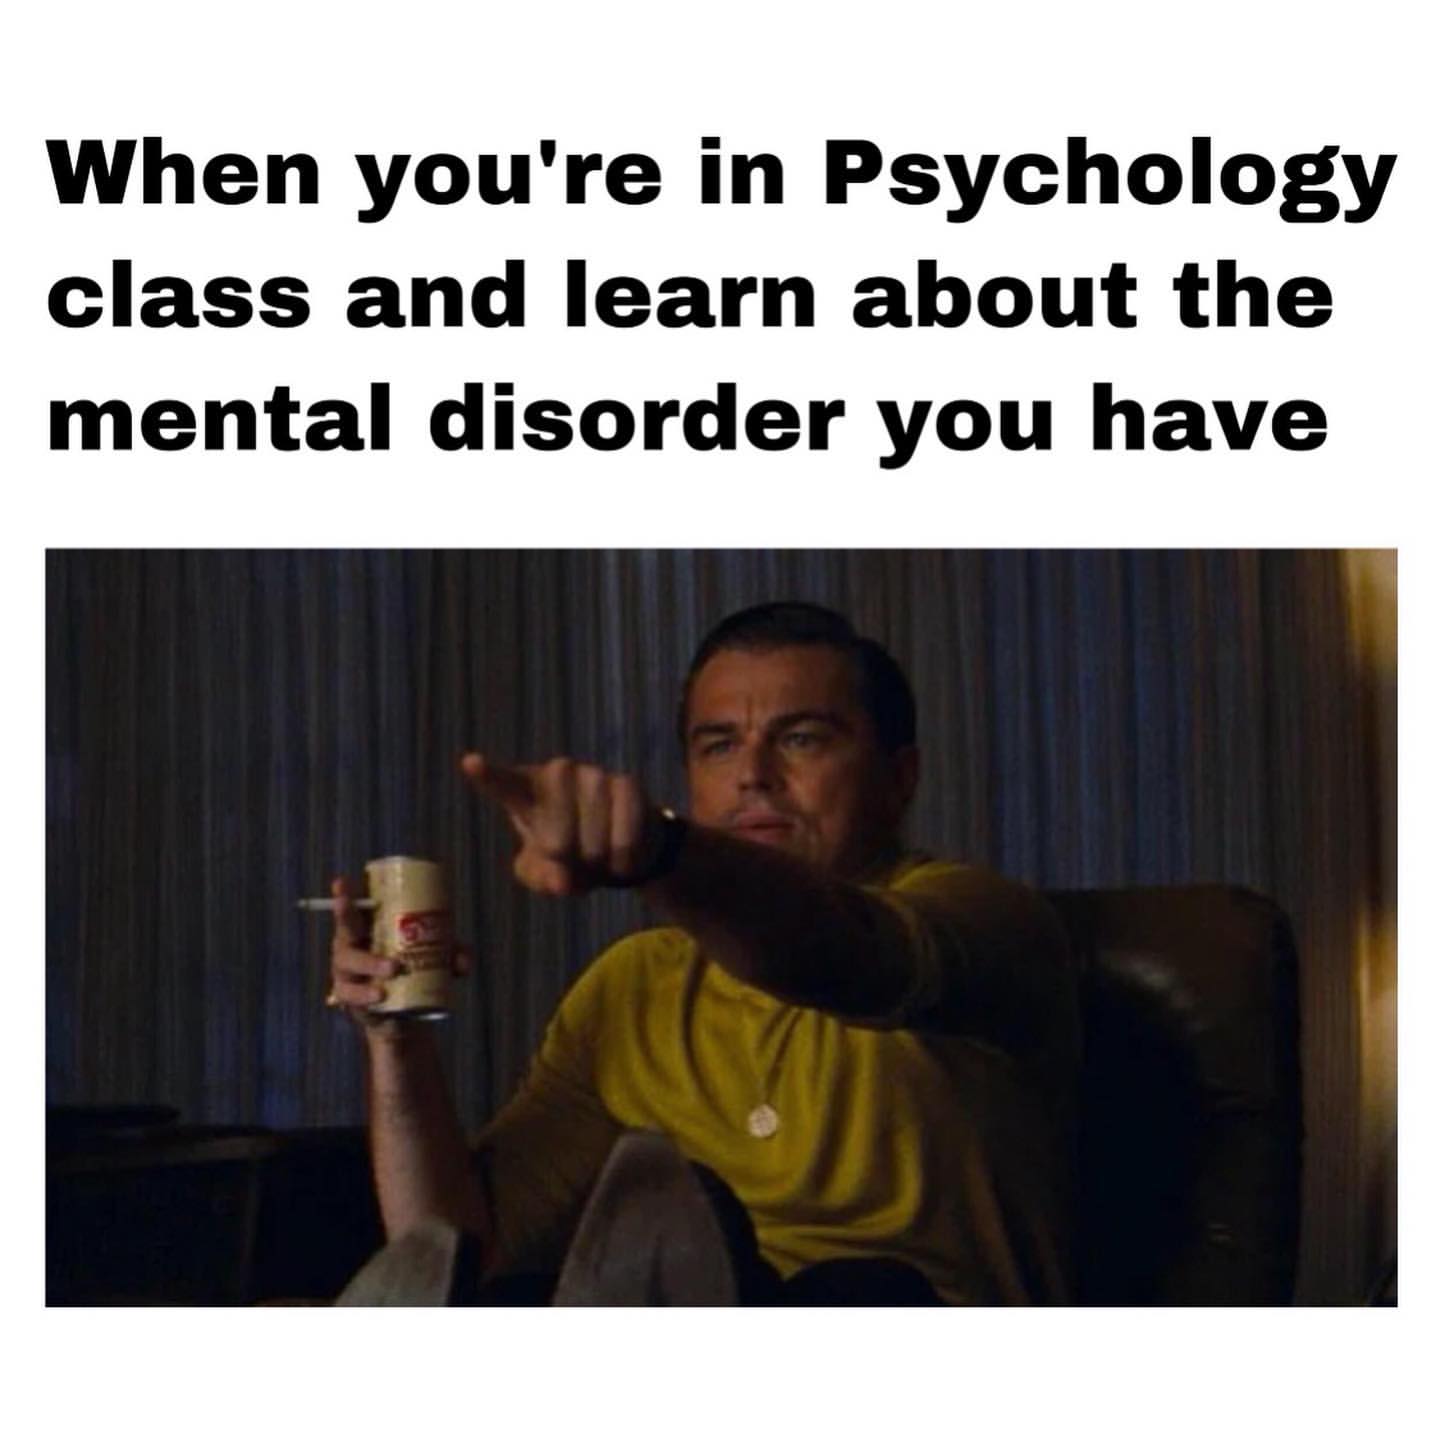 When you're in Psychology class and learn about the mental disorder you have.